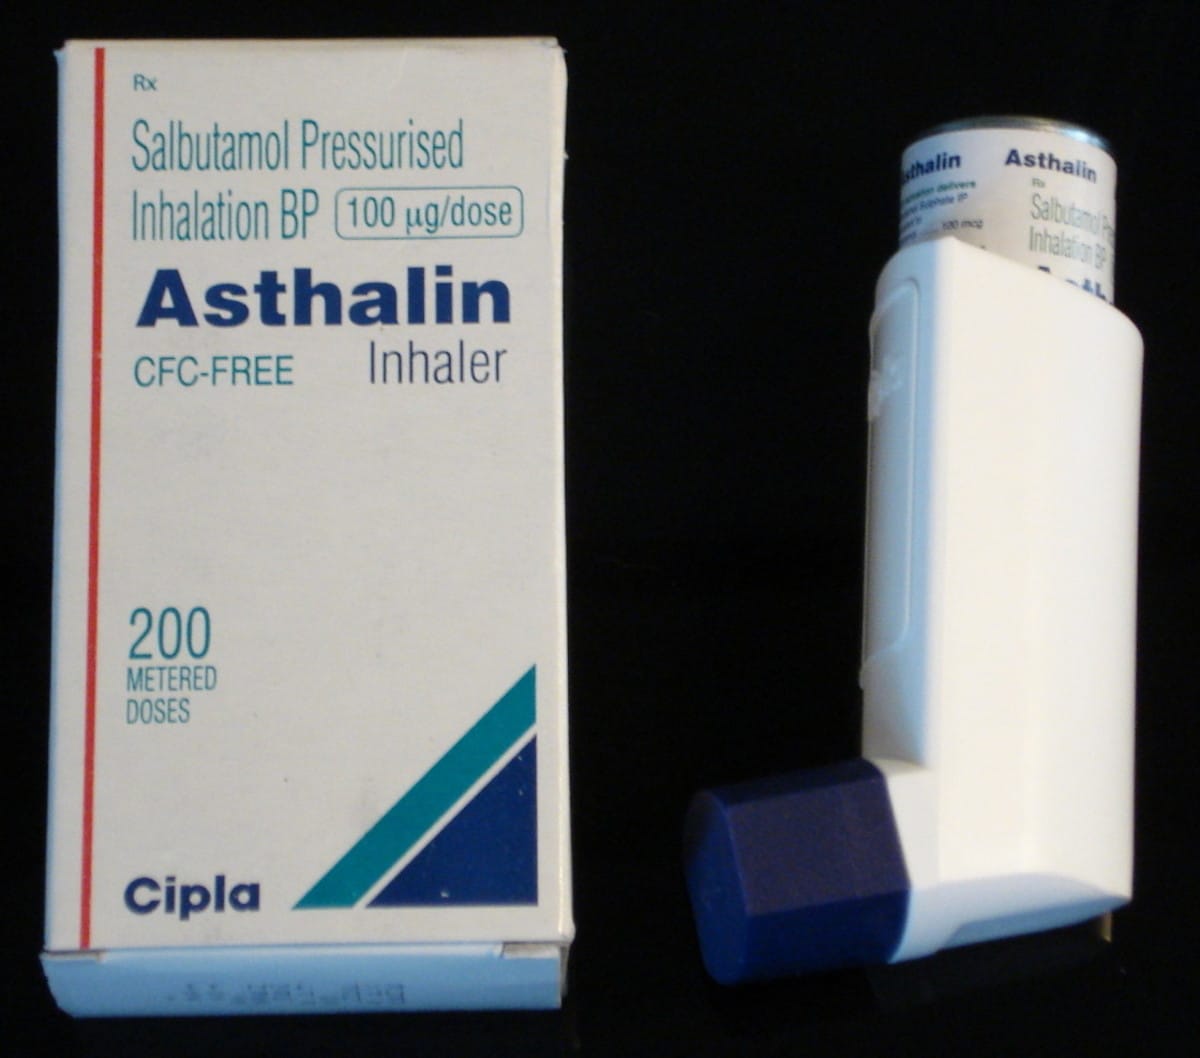 Asthalin uses and side effects